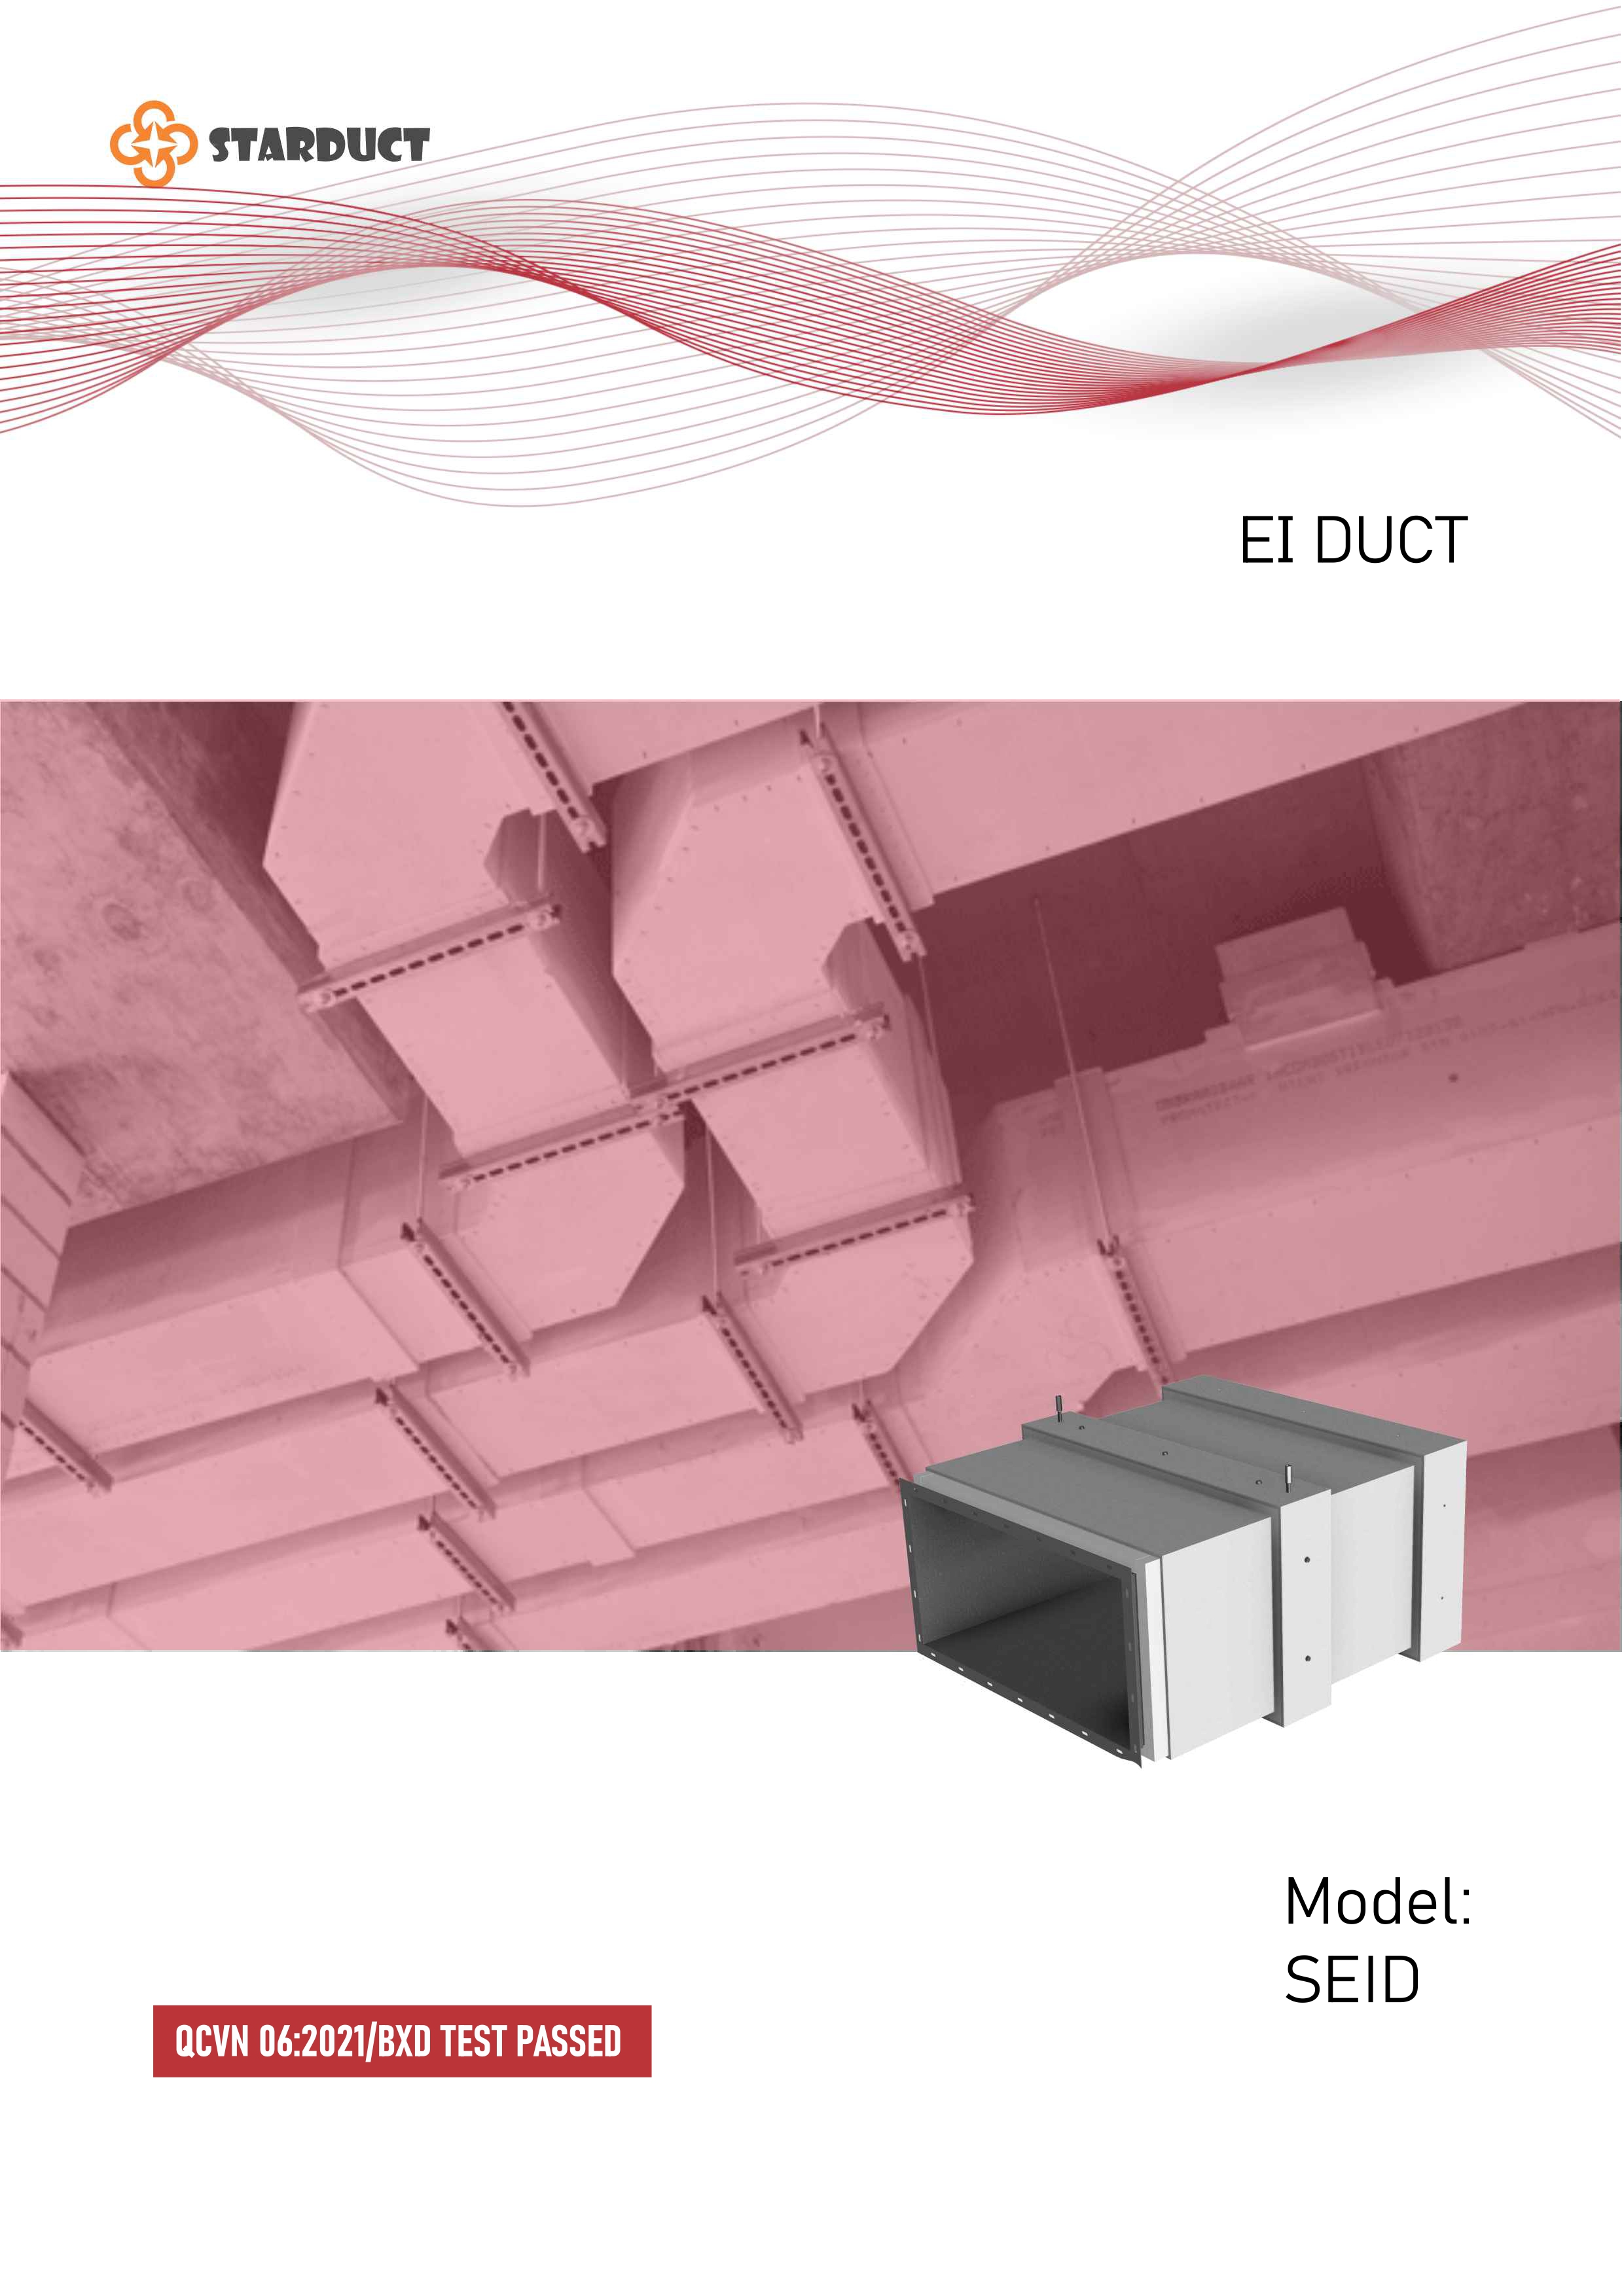 Duct EI & Fittings